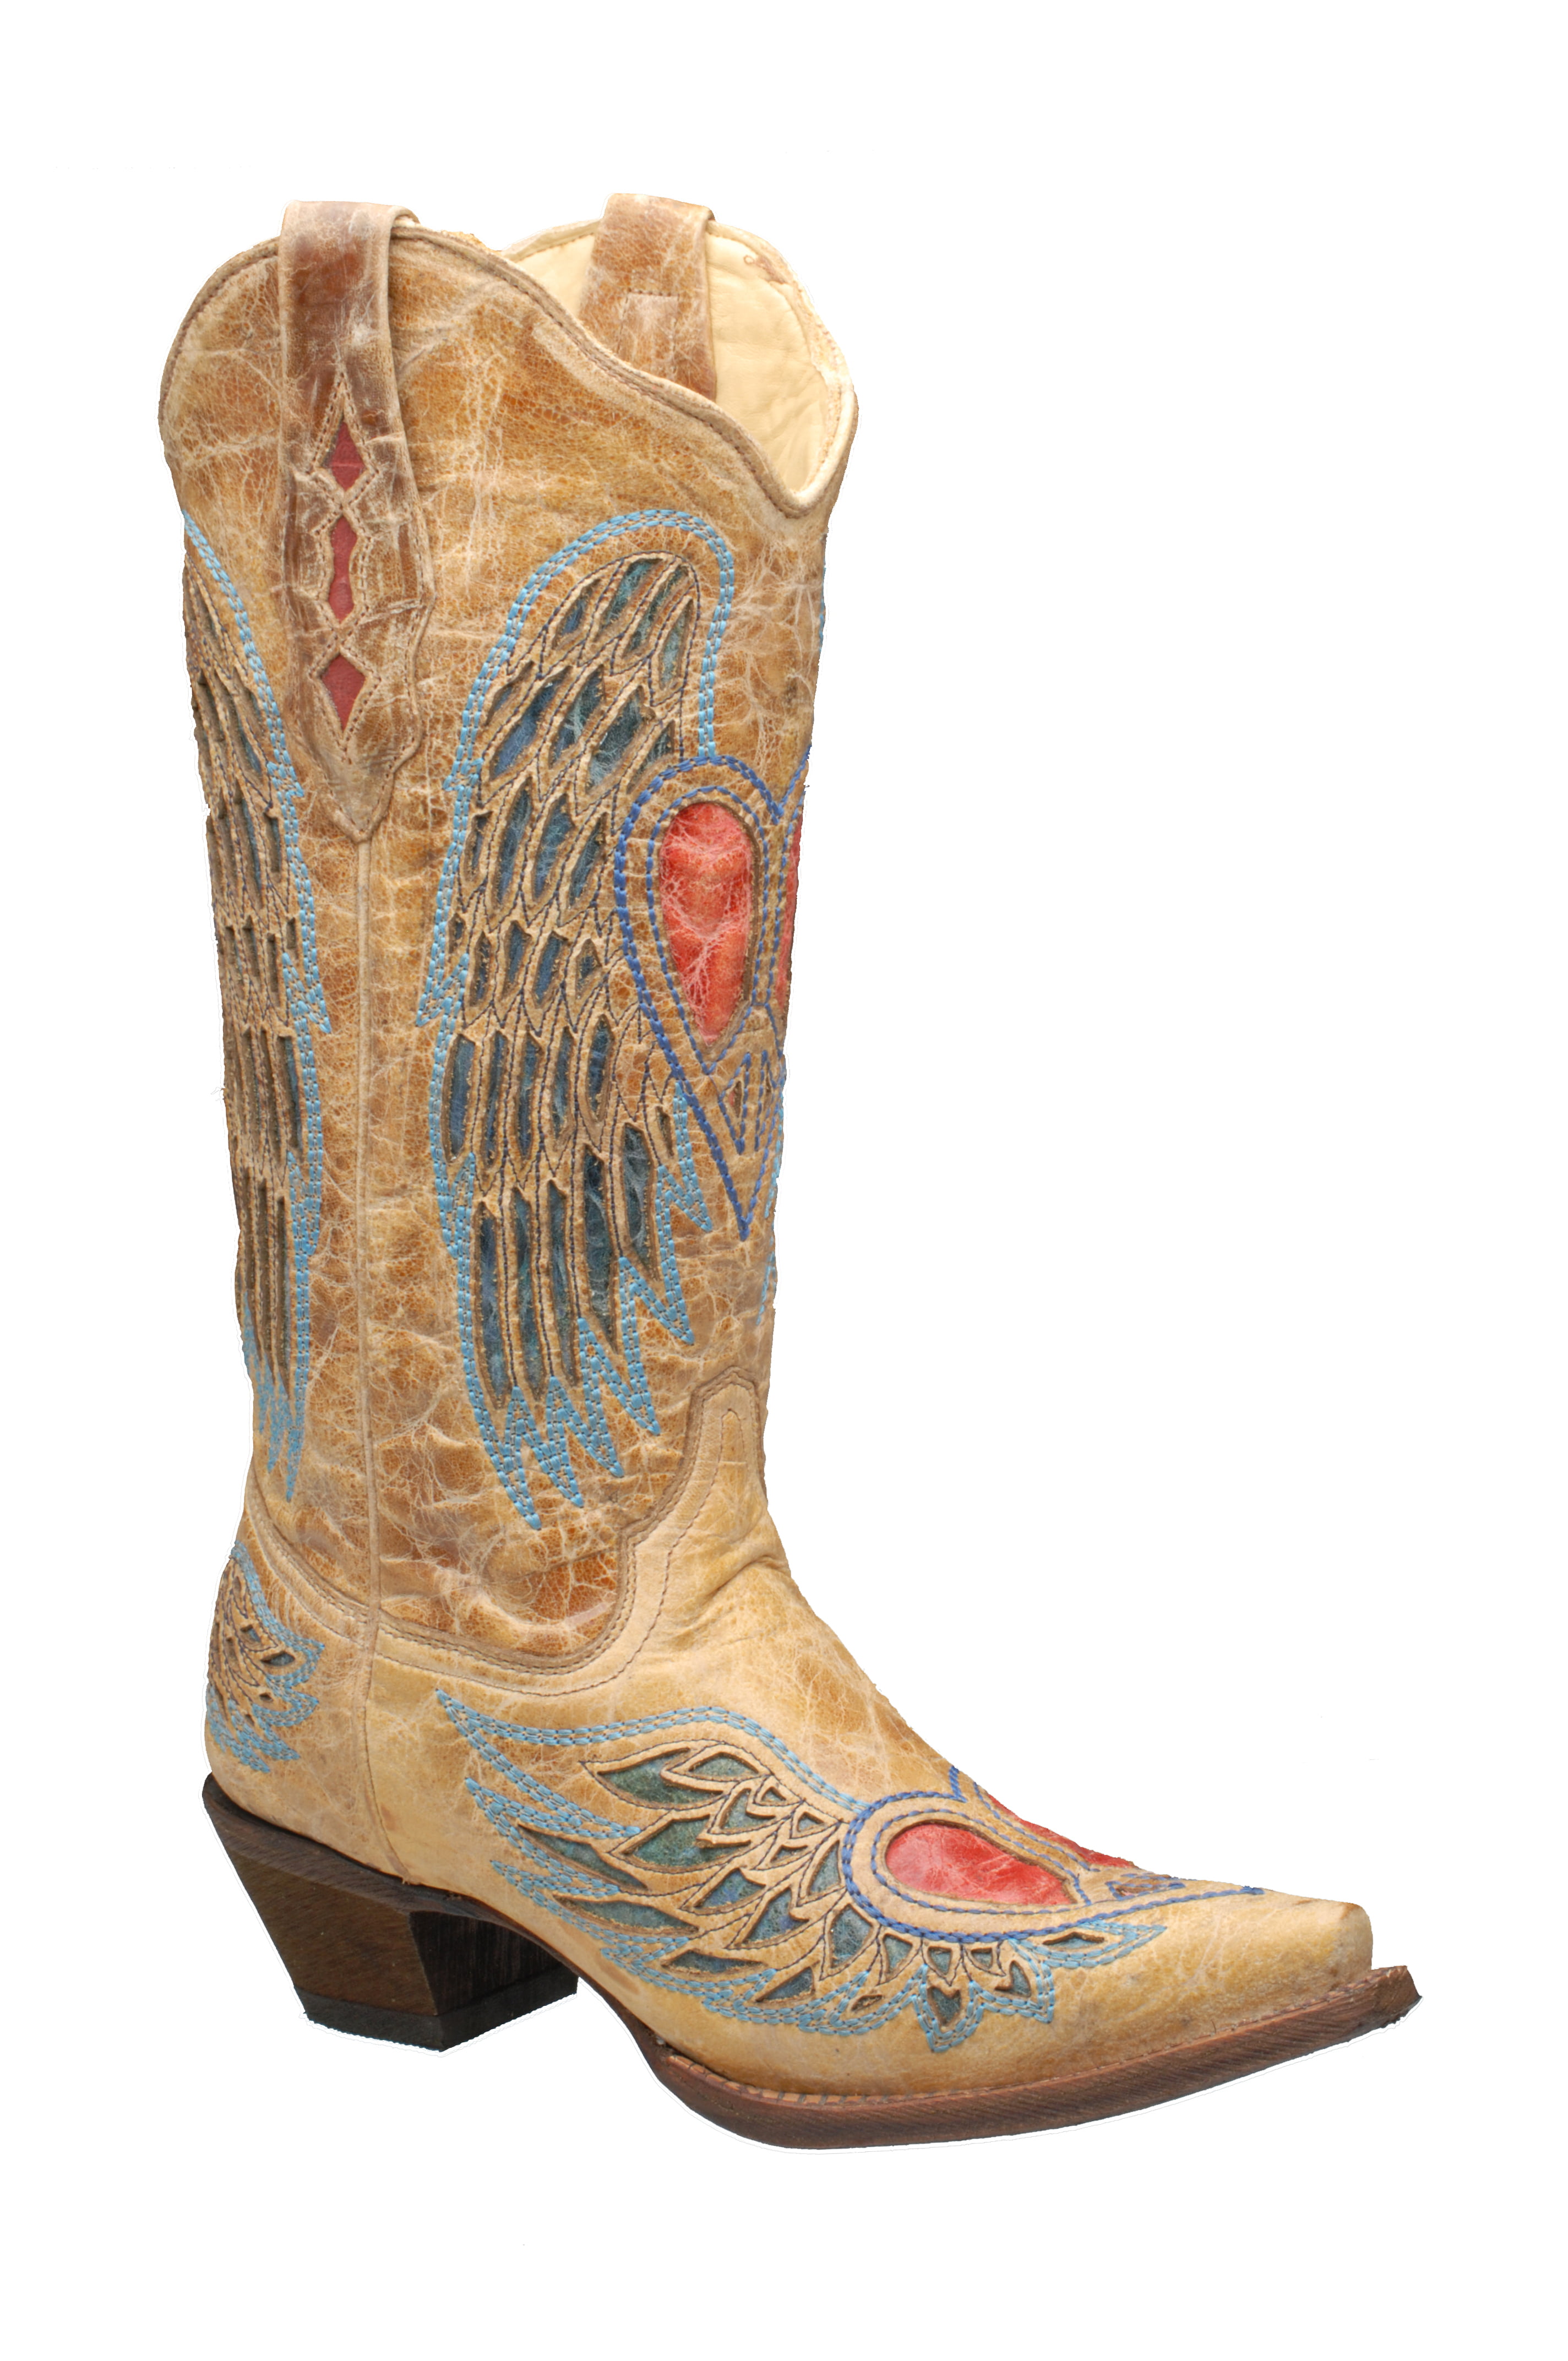 Leather Cowboy Boots Hearts Teal & Tan Boots Vintage Corral Ladies Boots Vintage Western Boots | Angel Wings Size 7.5M